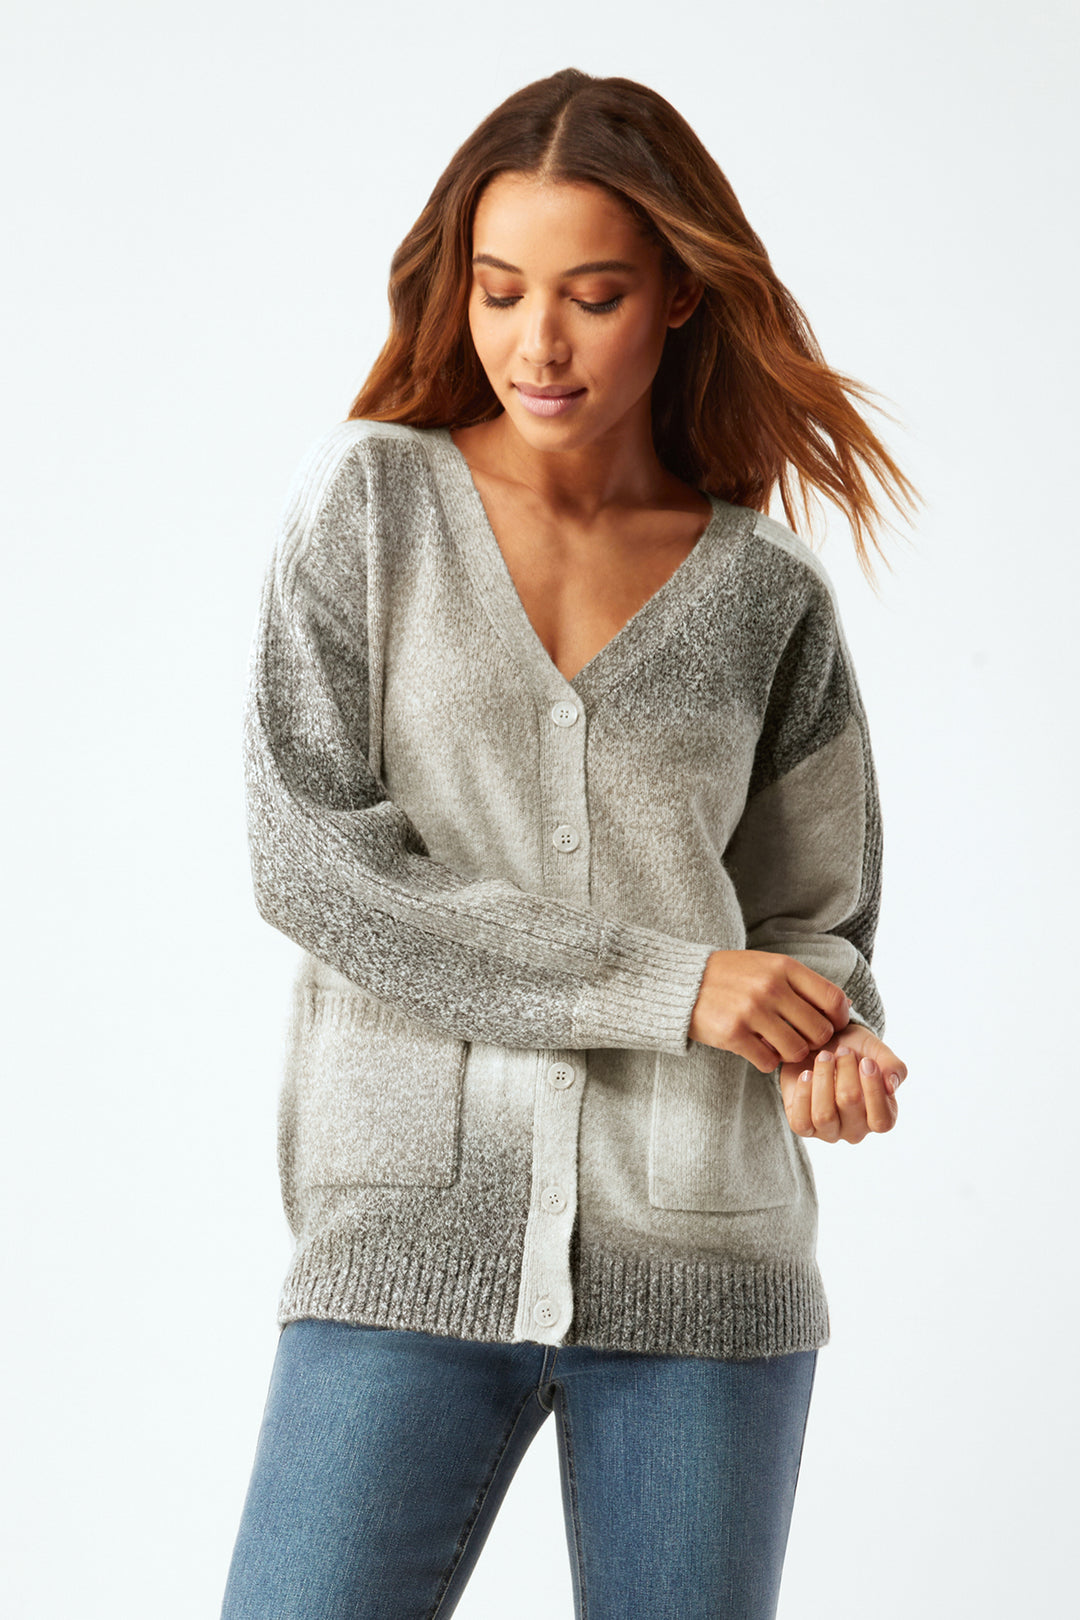 Space Dye Cardigan - Grey Ombre